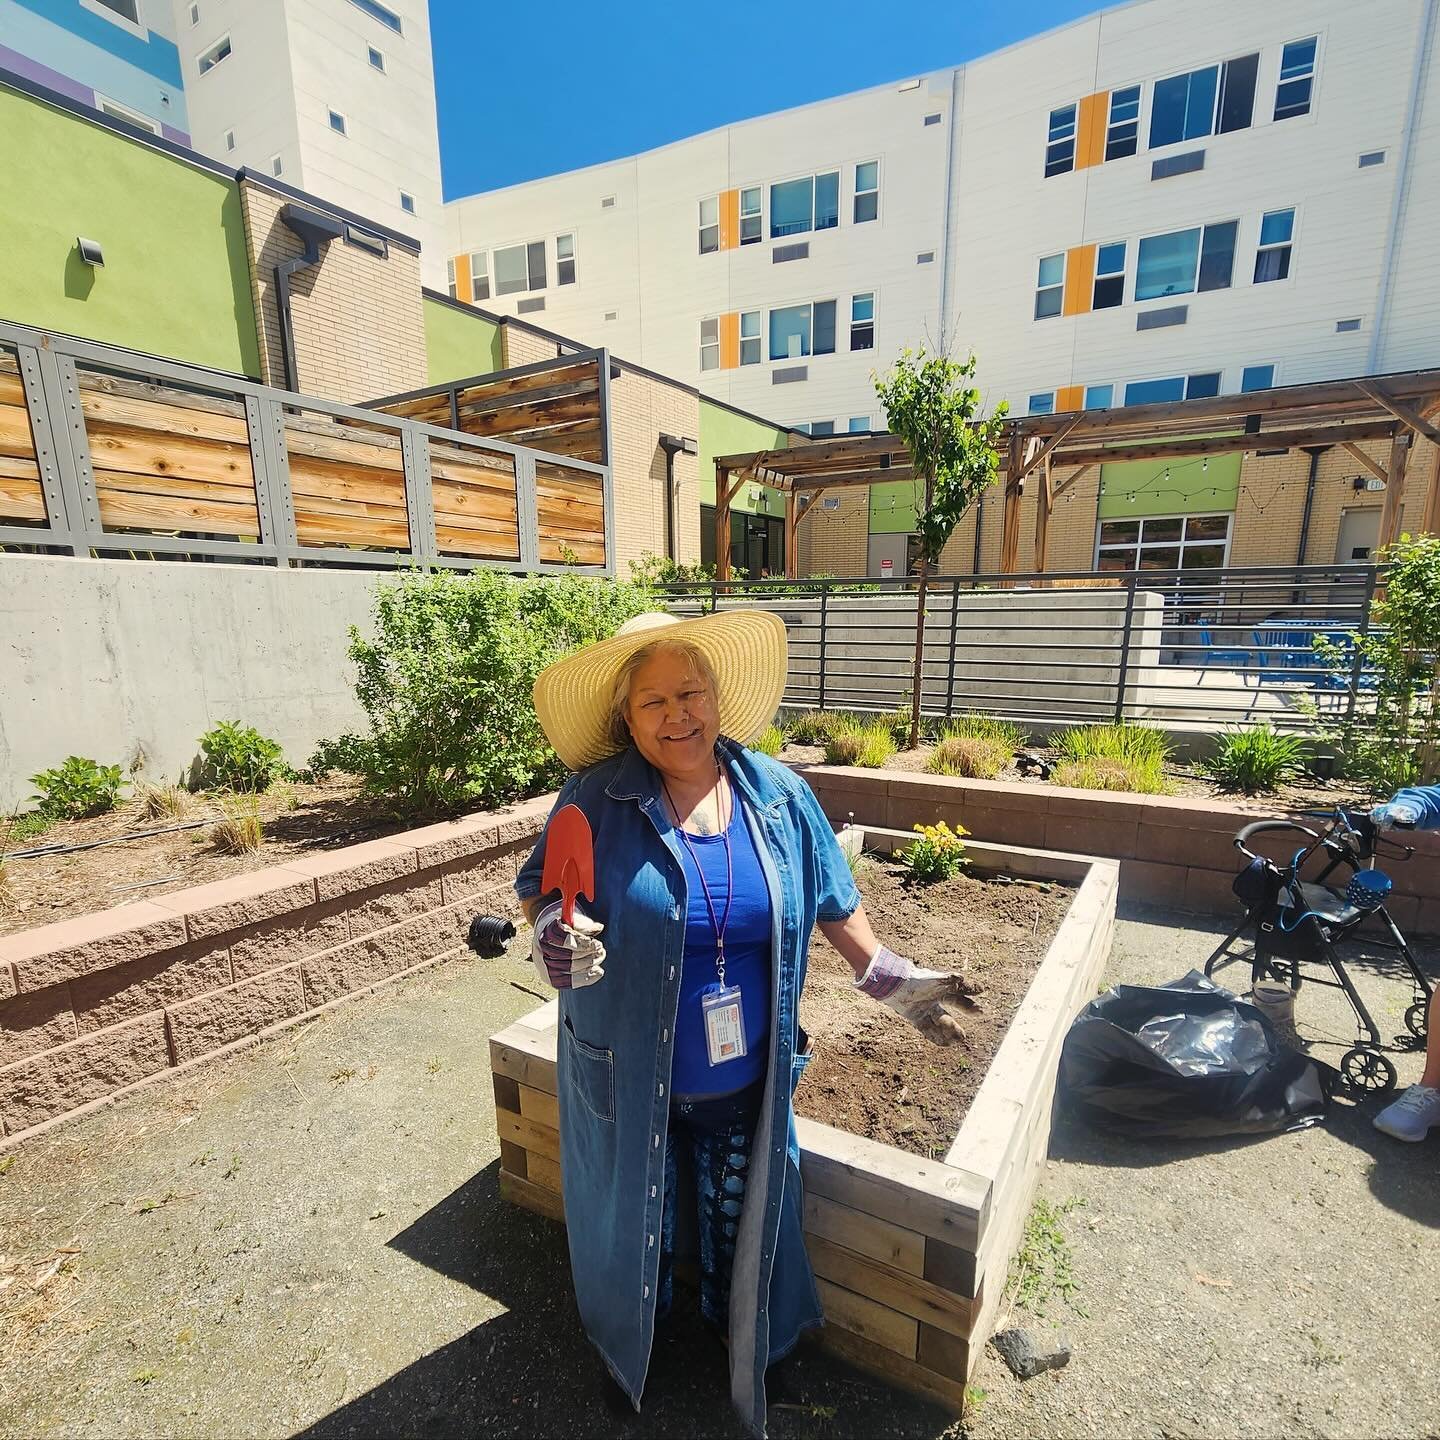 Spring has officially sprung at Delores as our gardening efforts are officially underway. Here&rsquo;s supportive housing resident Sandy getting into the spirit! Thank you to the kind soul who sent us these perfect sun hats for our gardening guests a